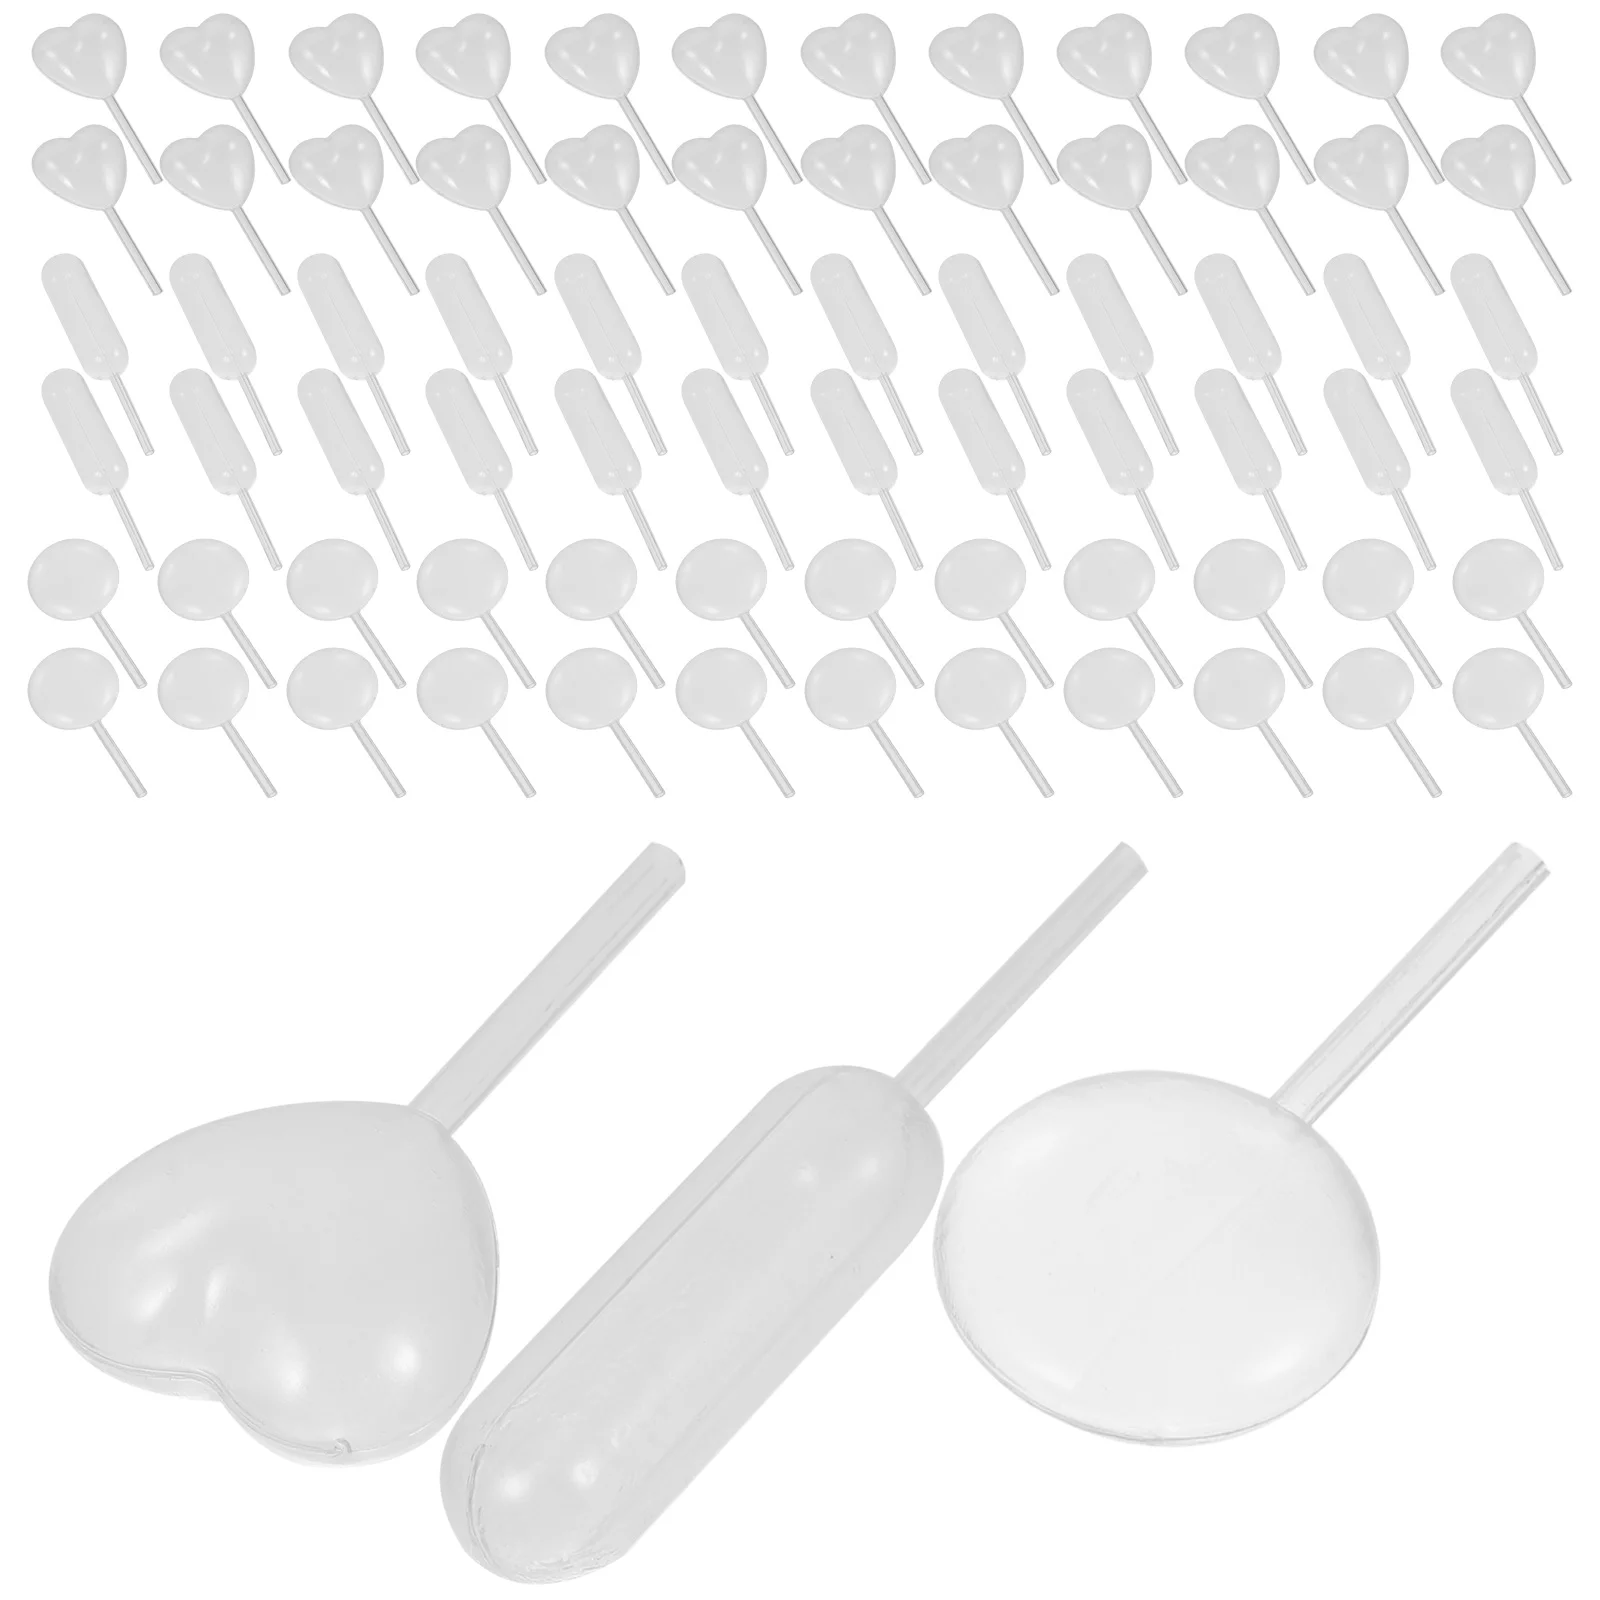 150 Pcs Pipettes Squeeze Dropper Transfer Disposable Cake Plastic Graduated Cupcakes Heart